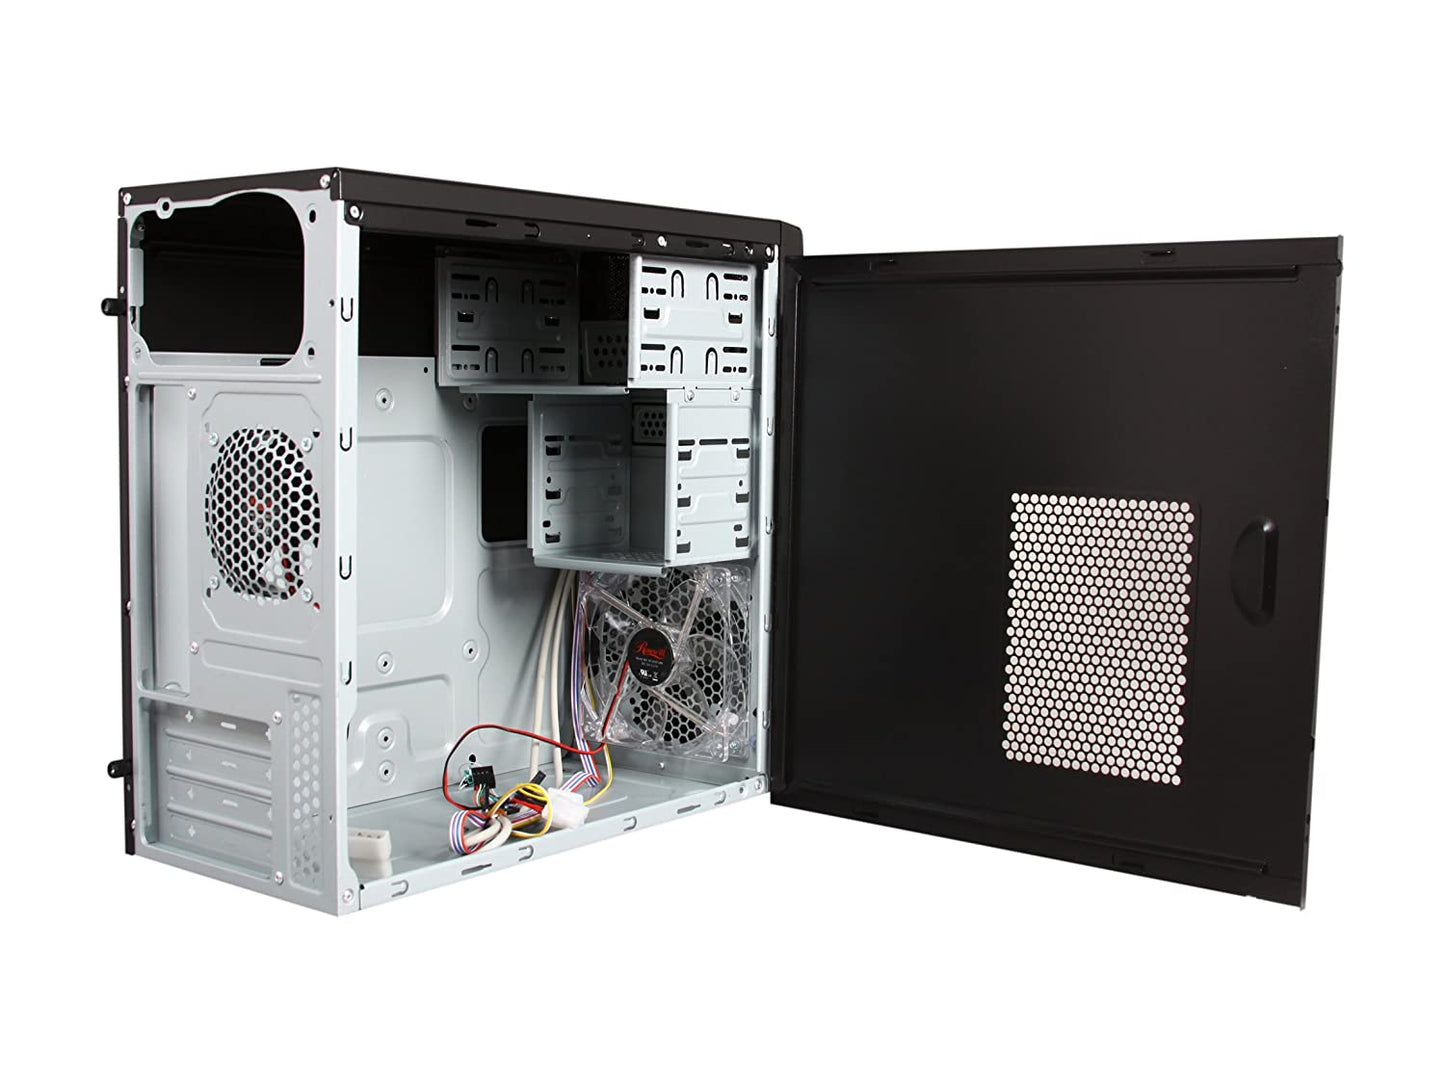 Rosewill Dual Fans MicroATX Mini Tower Computer Case